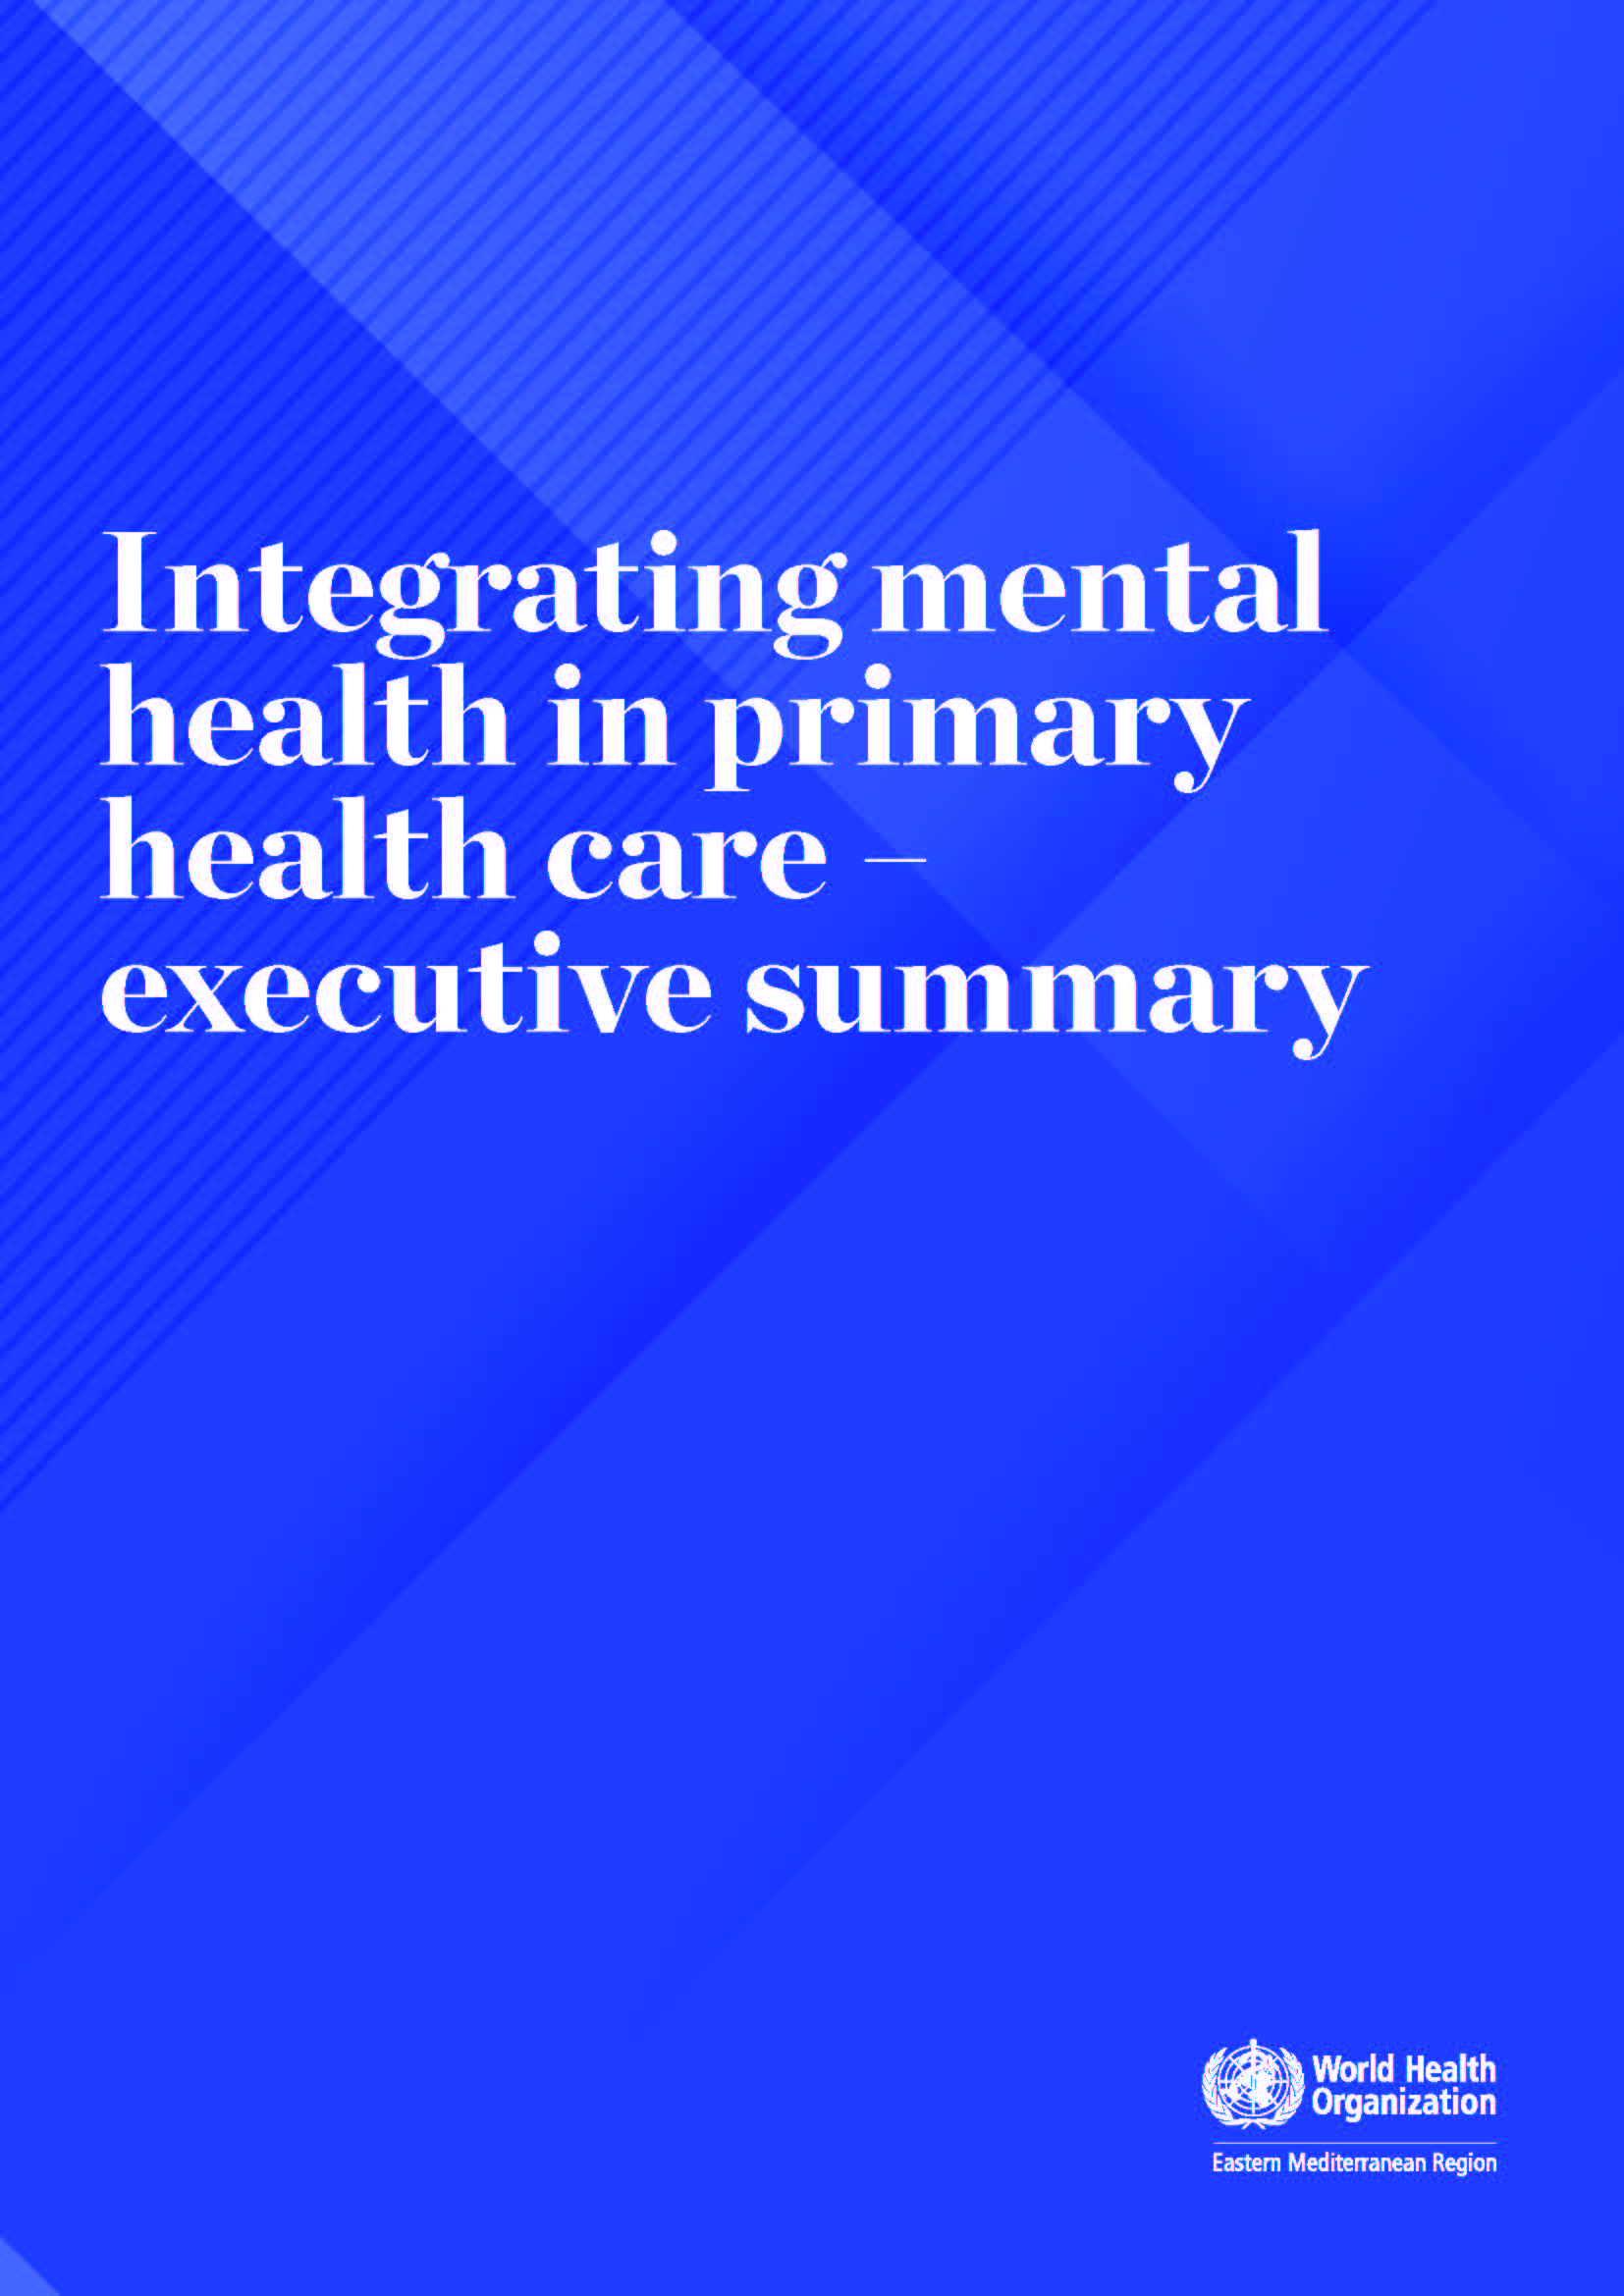 Integrating mental health in primary health care: executive summary